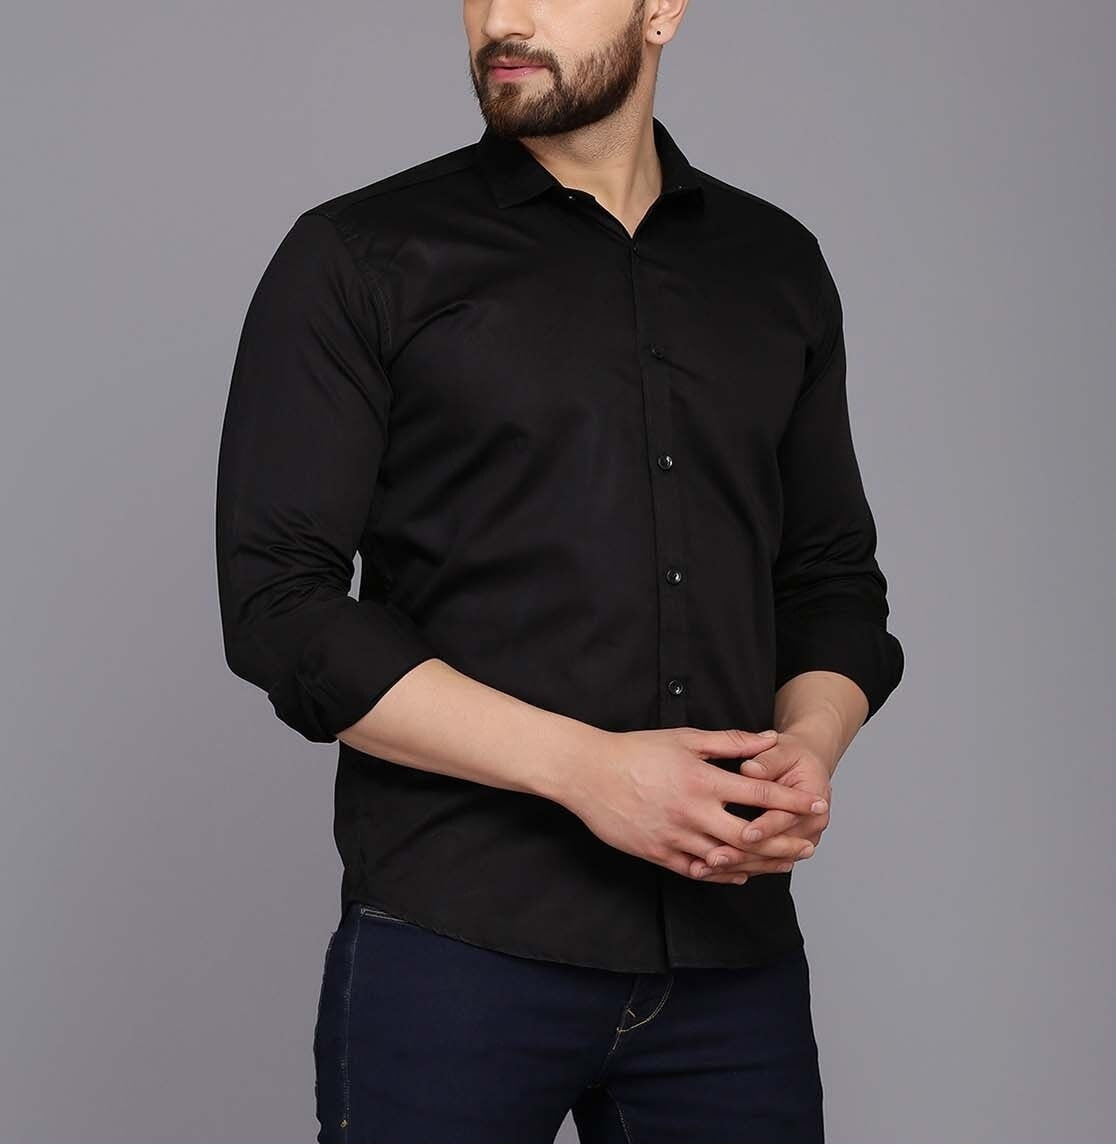 New Cotton Blend Solid Shirts (Black)